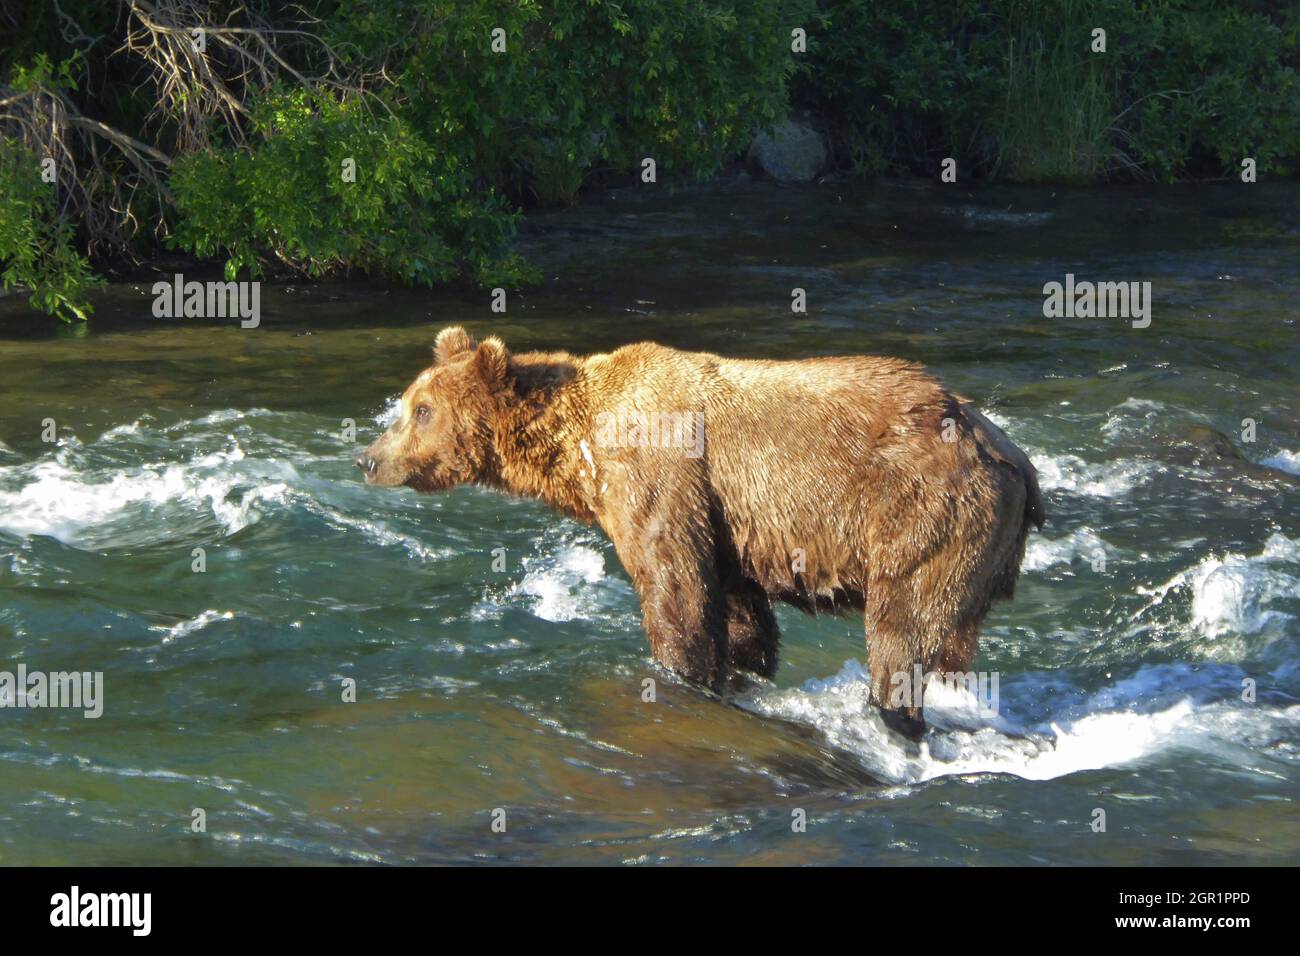 An adult brown bear known as 151 Walker searches for salmon at Brooks Falls in Katmai National Park and Preserve July 1, 2018 near King Salmon, Alaska. Stock Photo